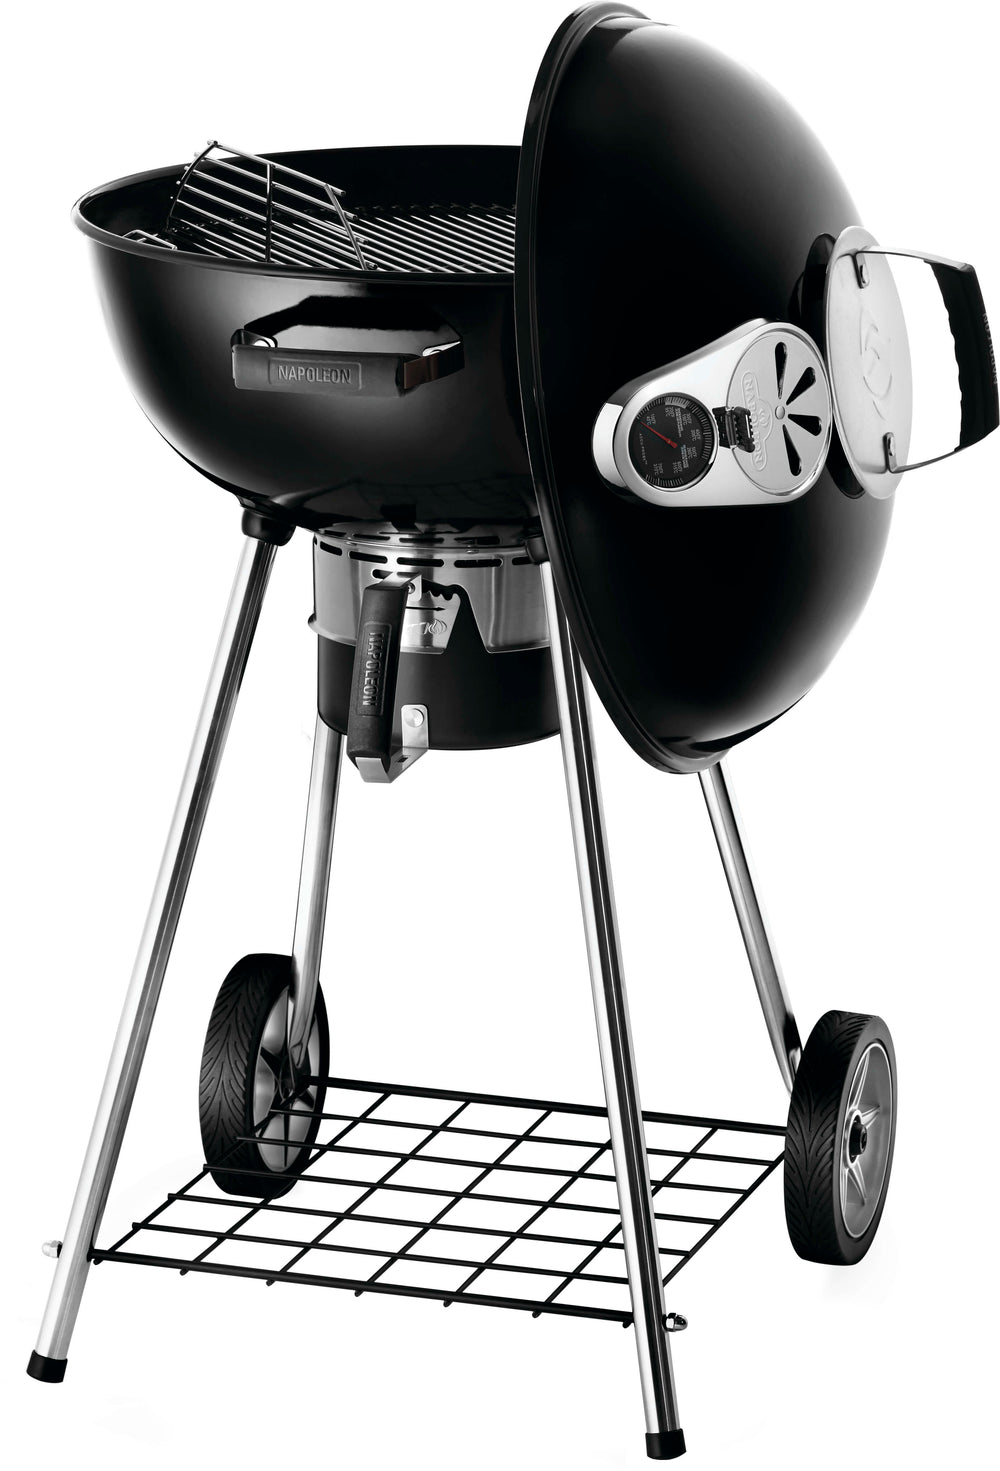 Napoleon - 22" Charcoal Kettle Grill - Black_1